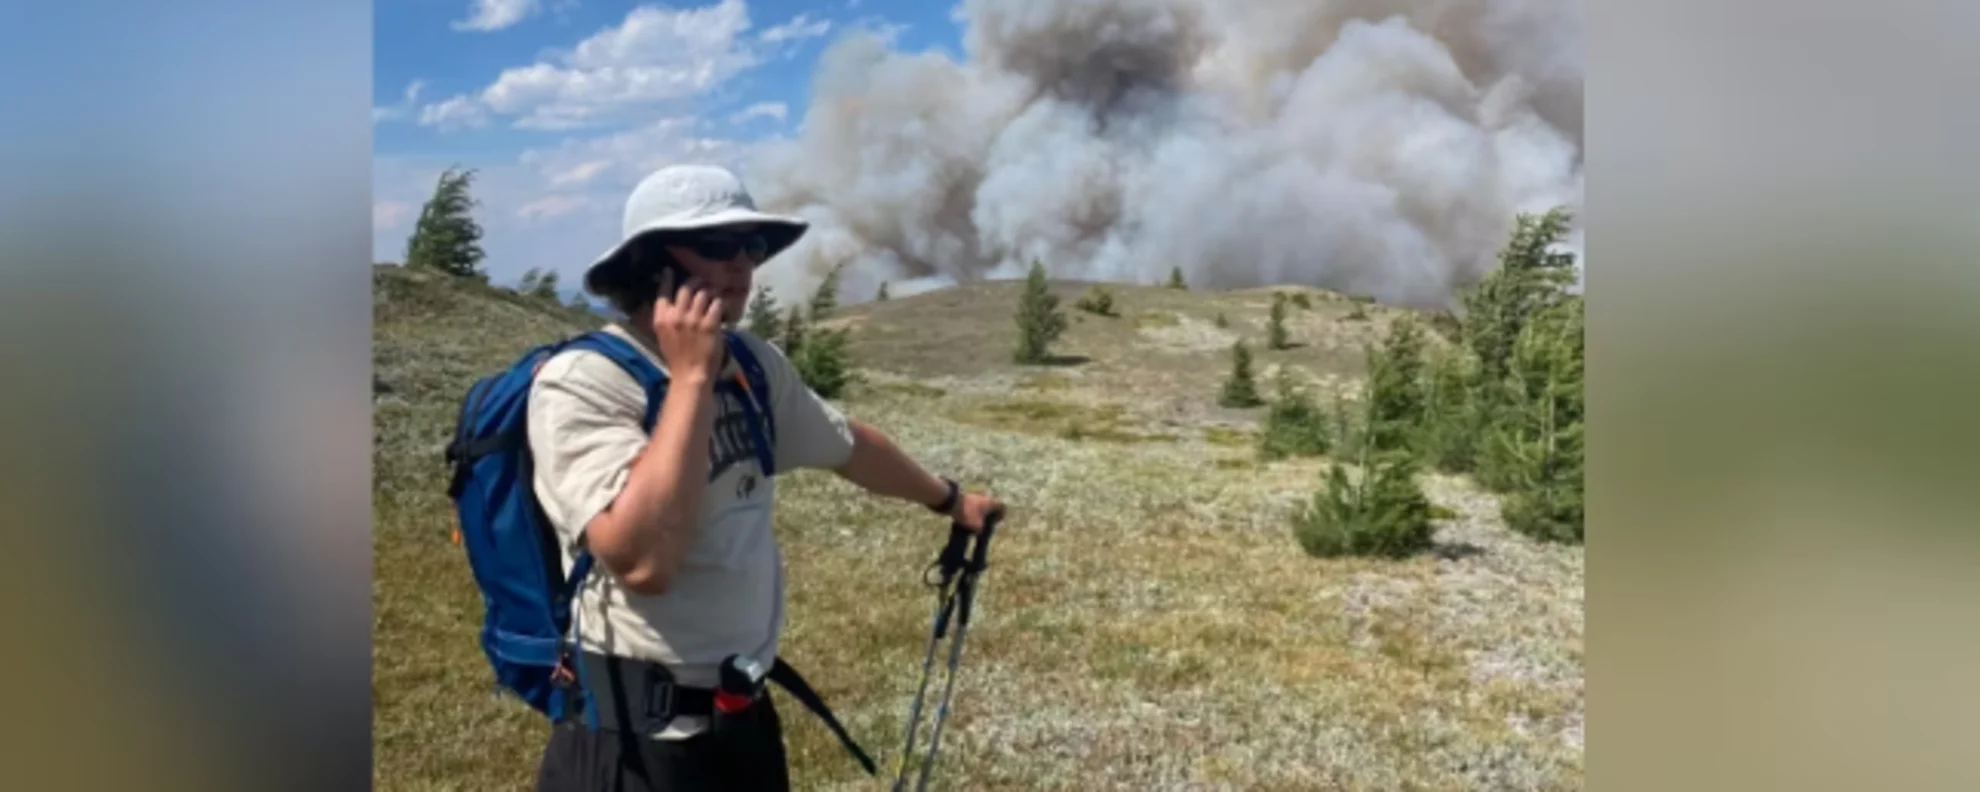 Helicopter pilot rescues B.C. hikers from wildfire near Invermere, B.C.